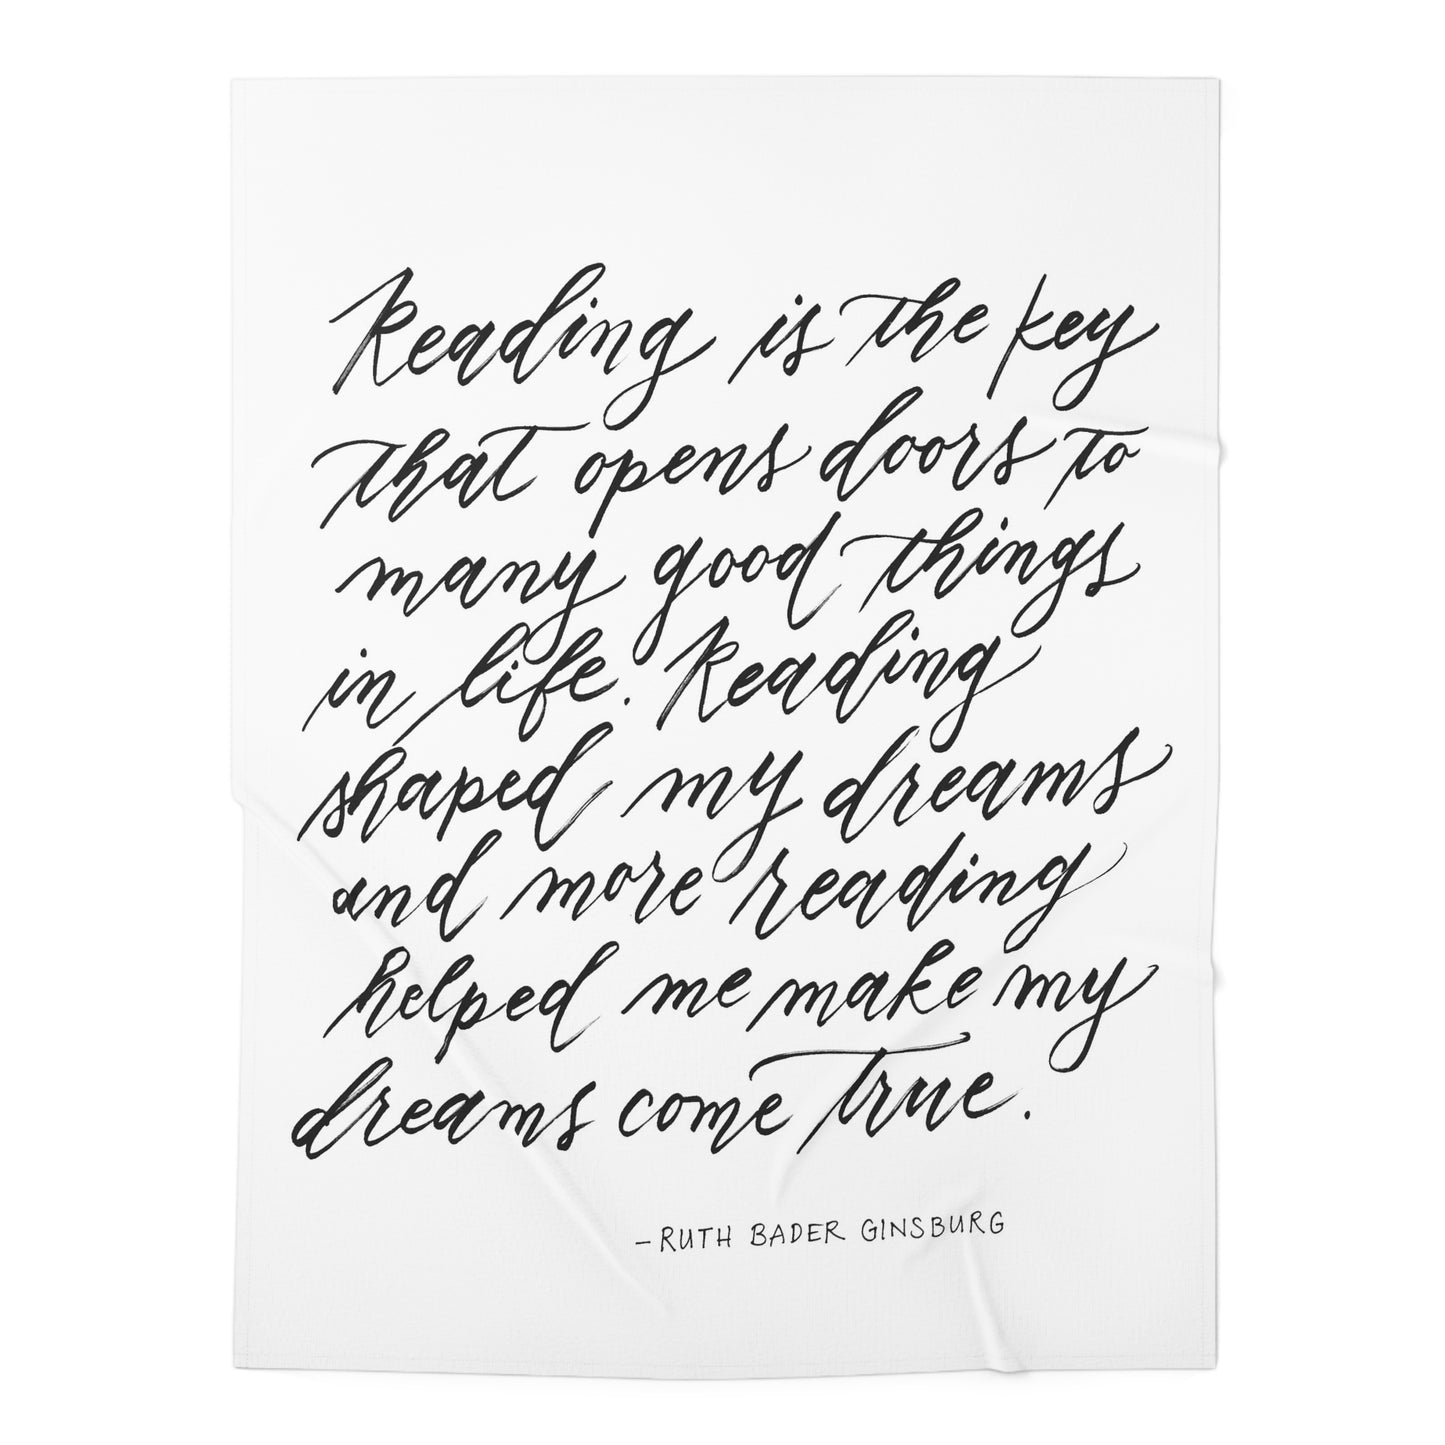 "Reading is Key" Ruth Bader Ginsburg RBG Quote Calligraphy Printed Super Soft Baby Swaddle Blanket